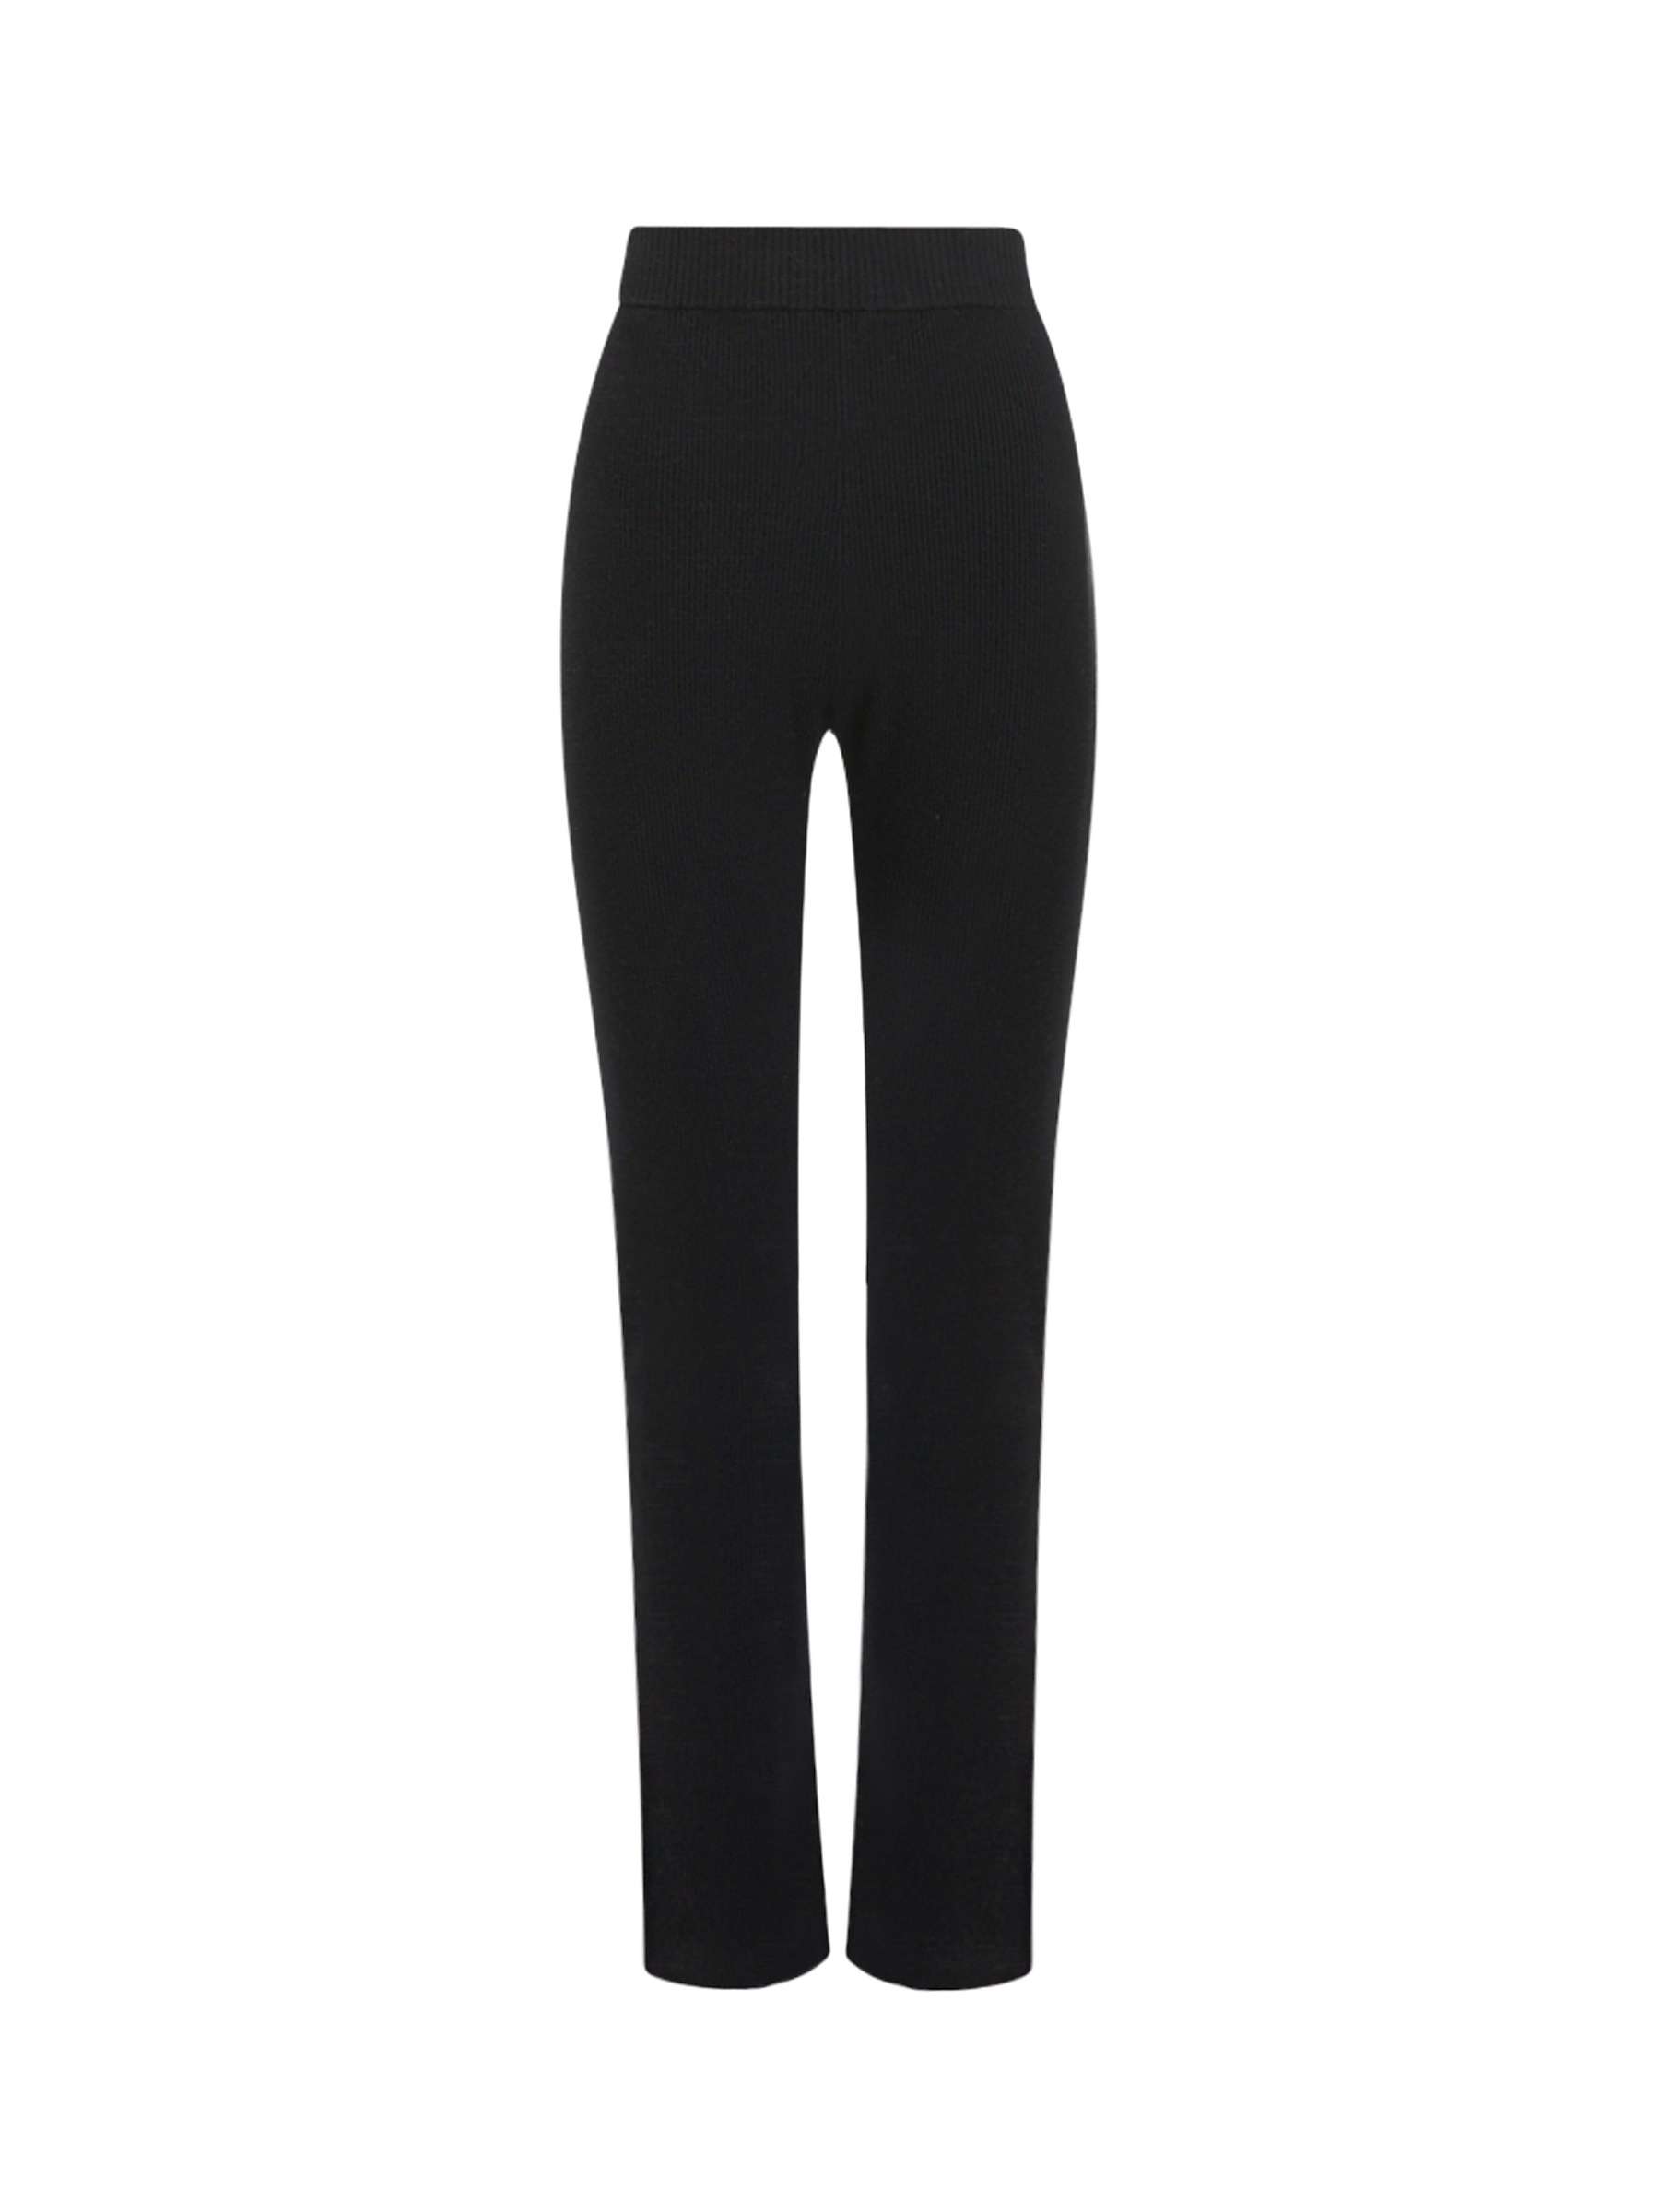 Buy Great Plains Ensley Knit High Waist Trousers, Black Online at johnlewis.com